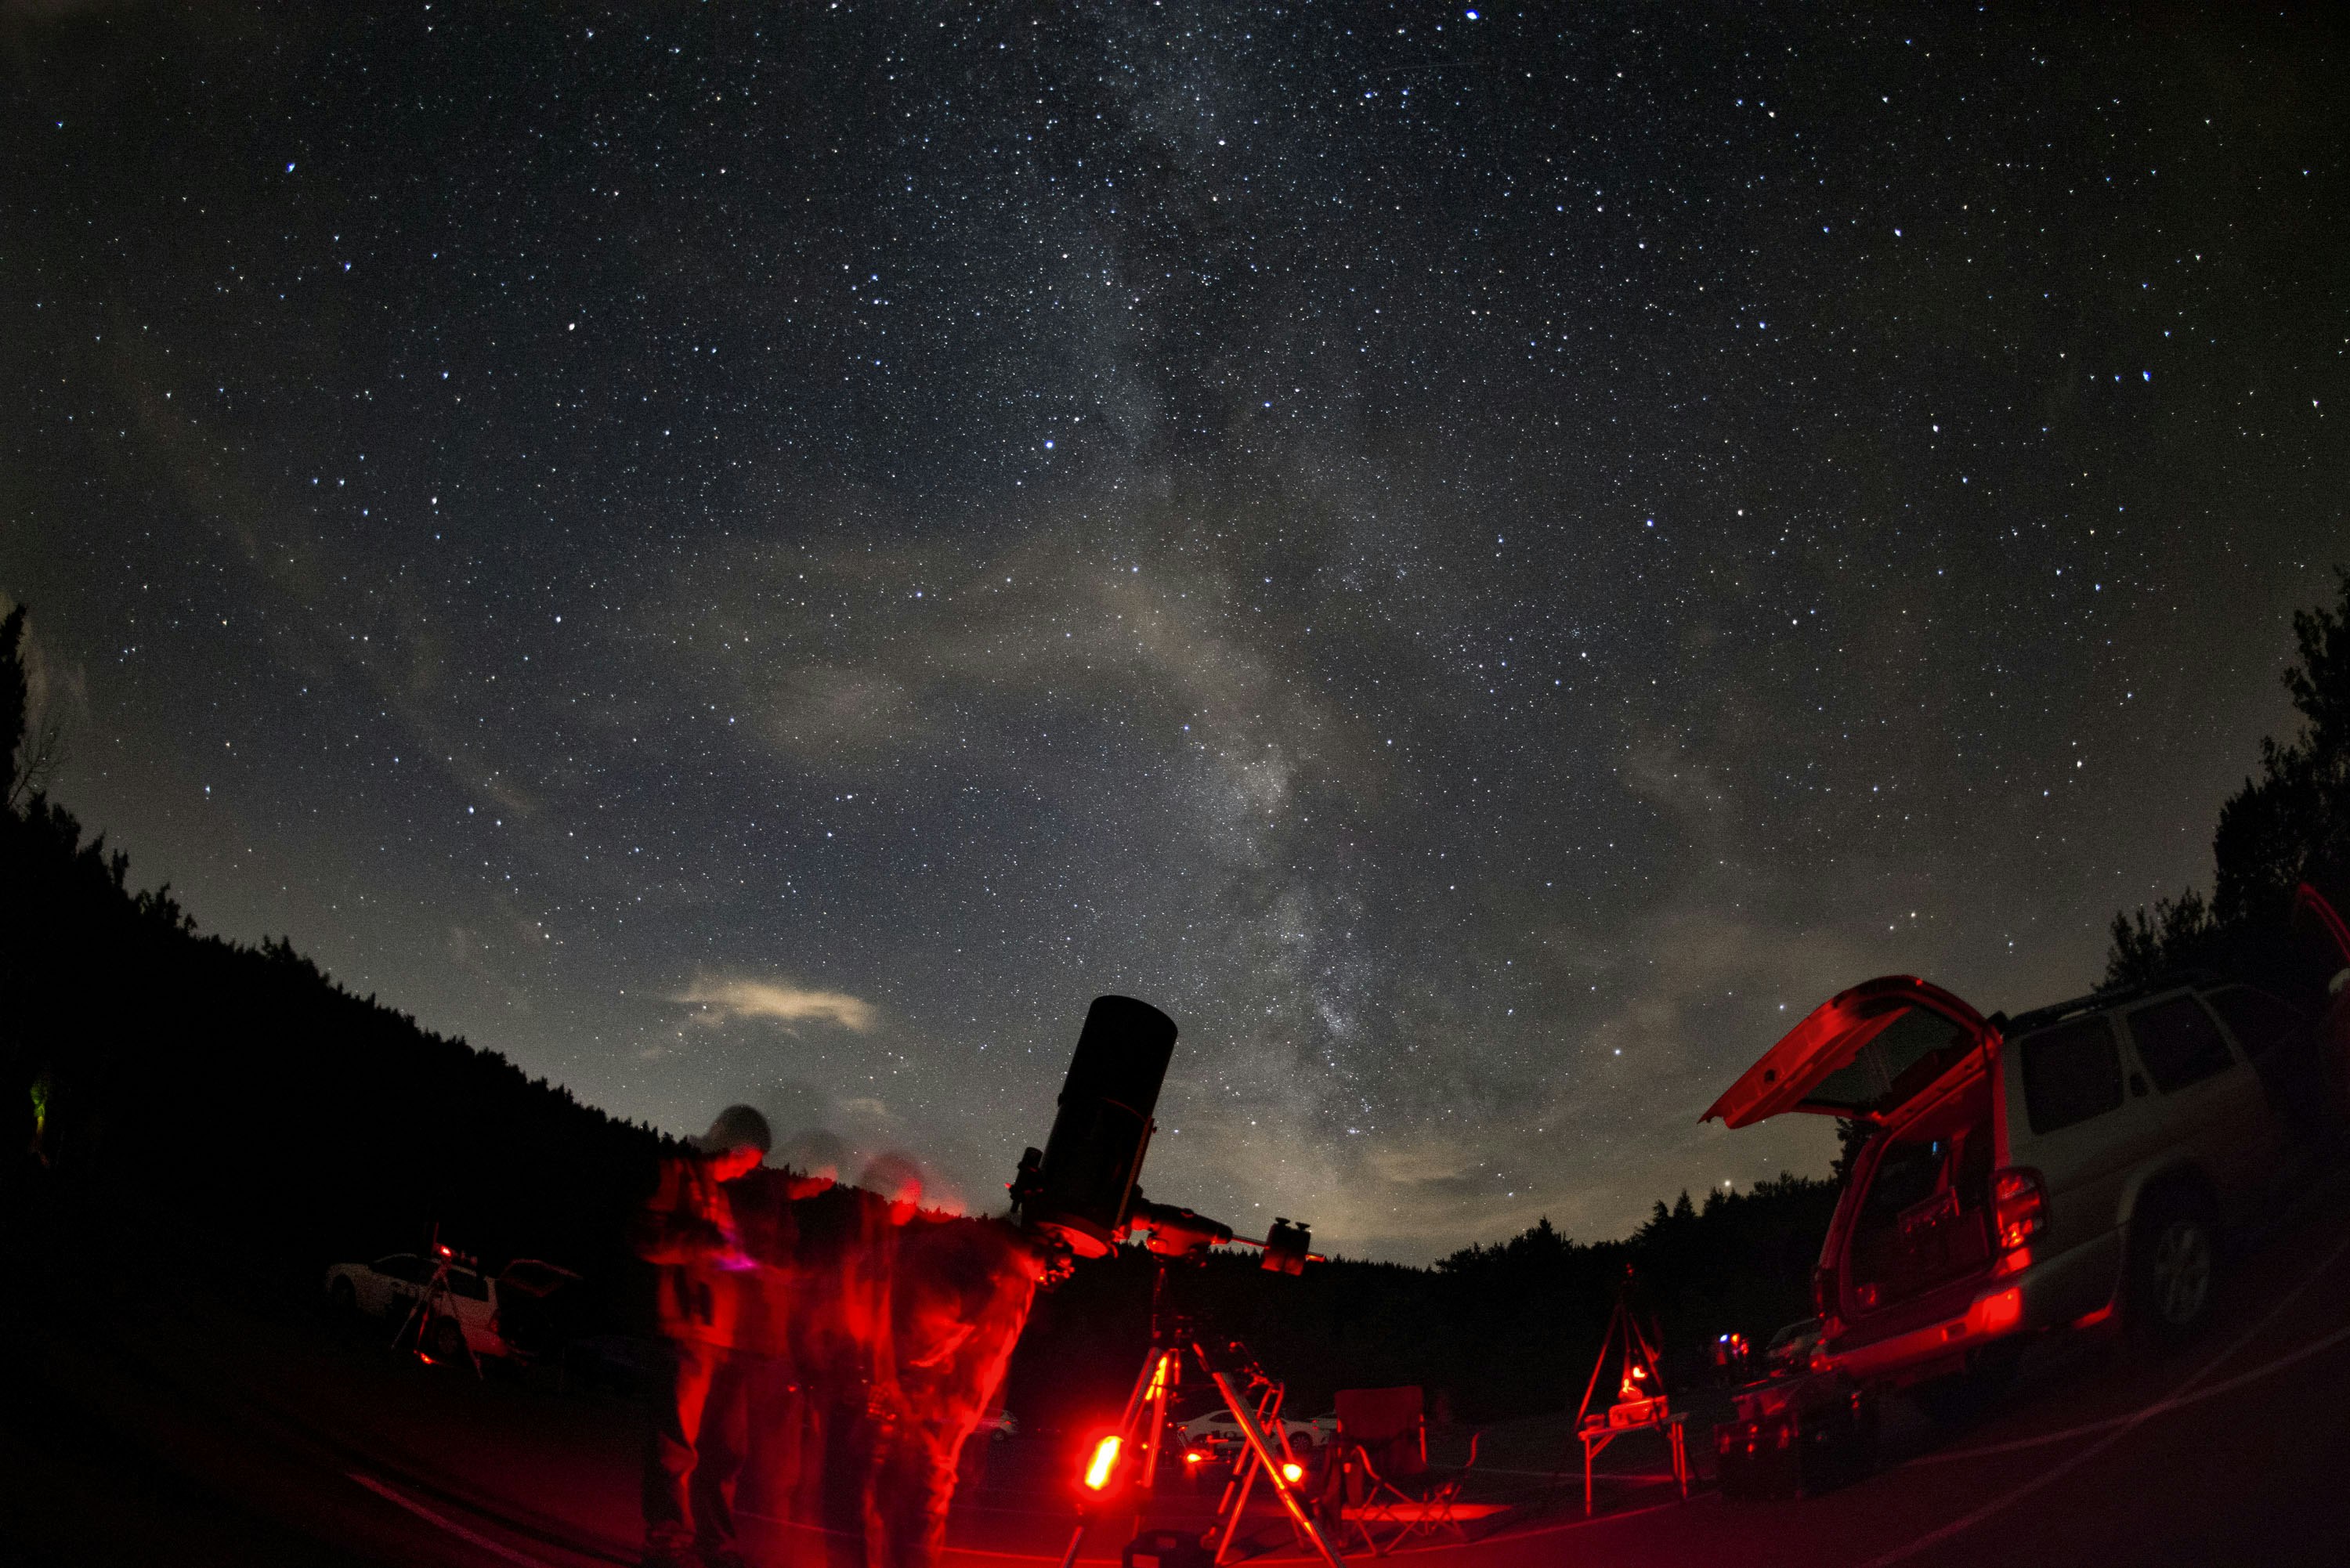 An Amateur Astronomers Association of New York stargazing event, lit with red lights